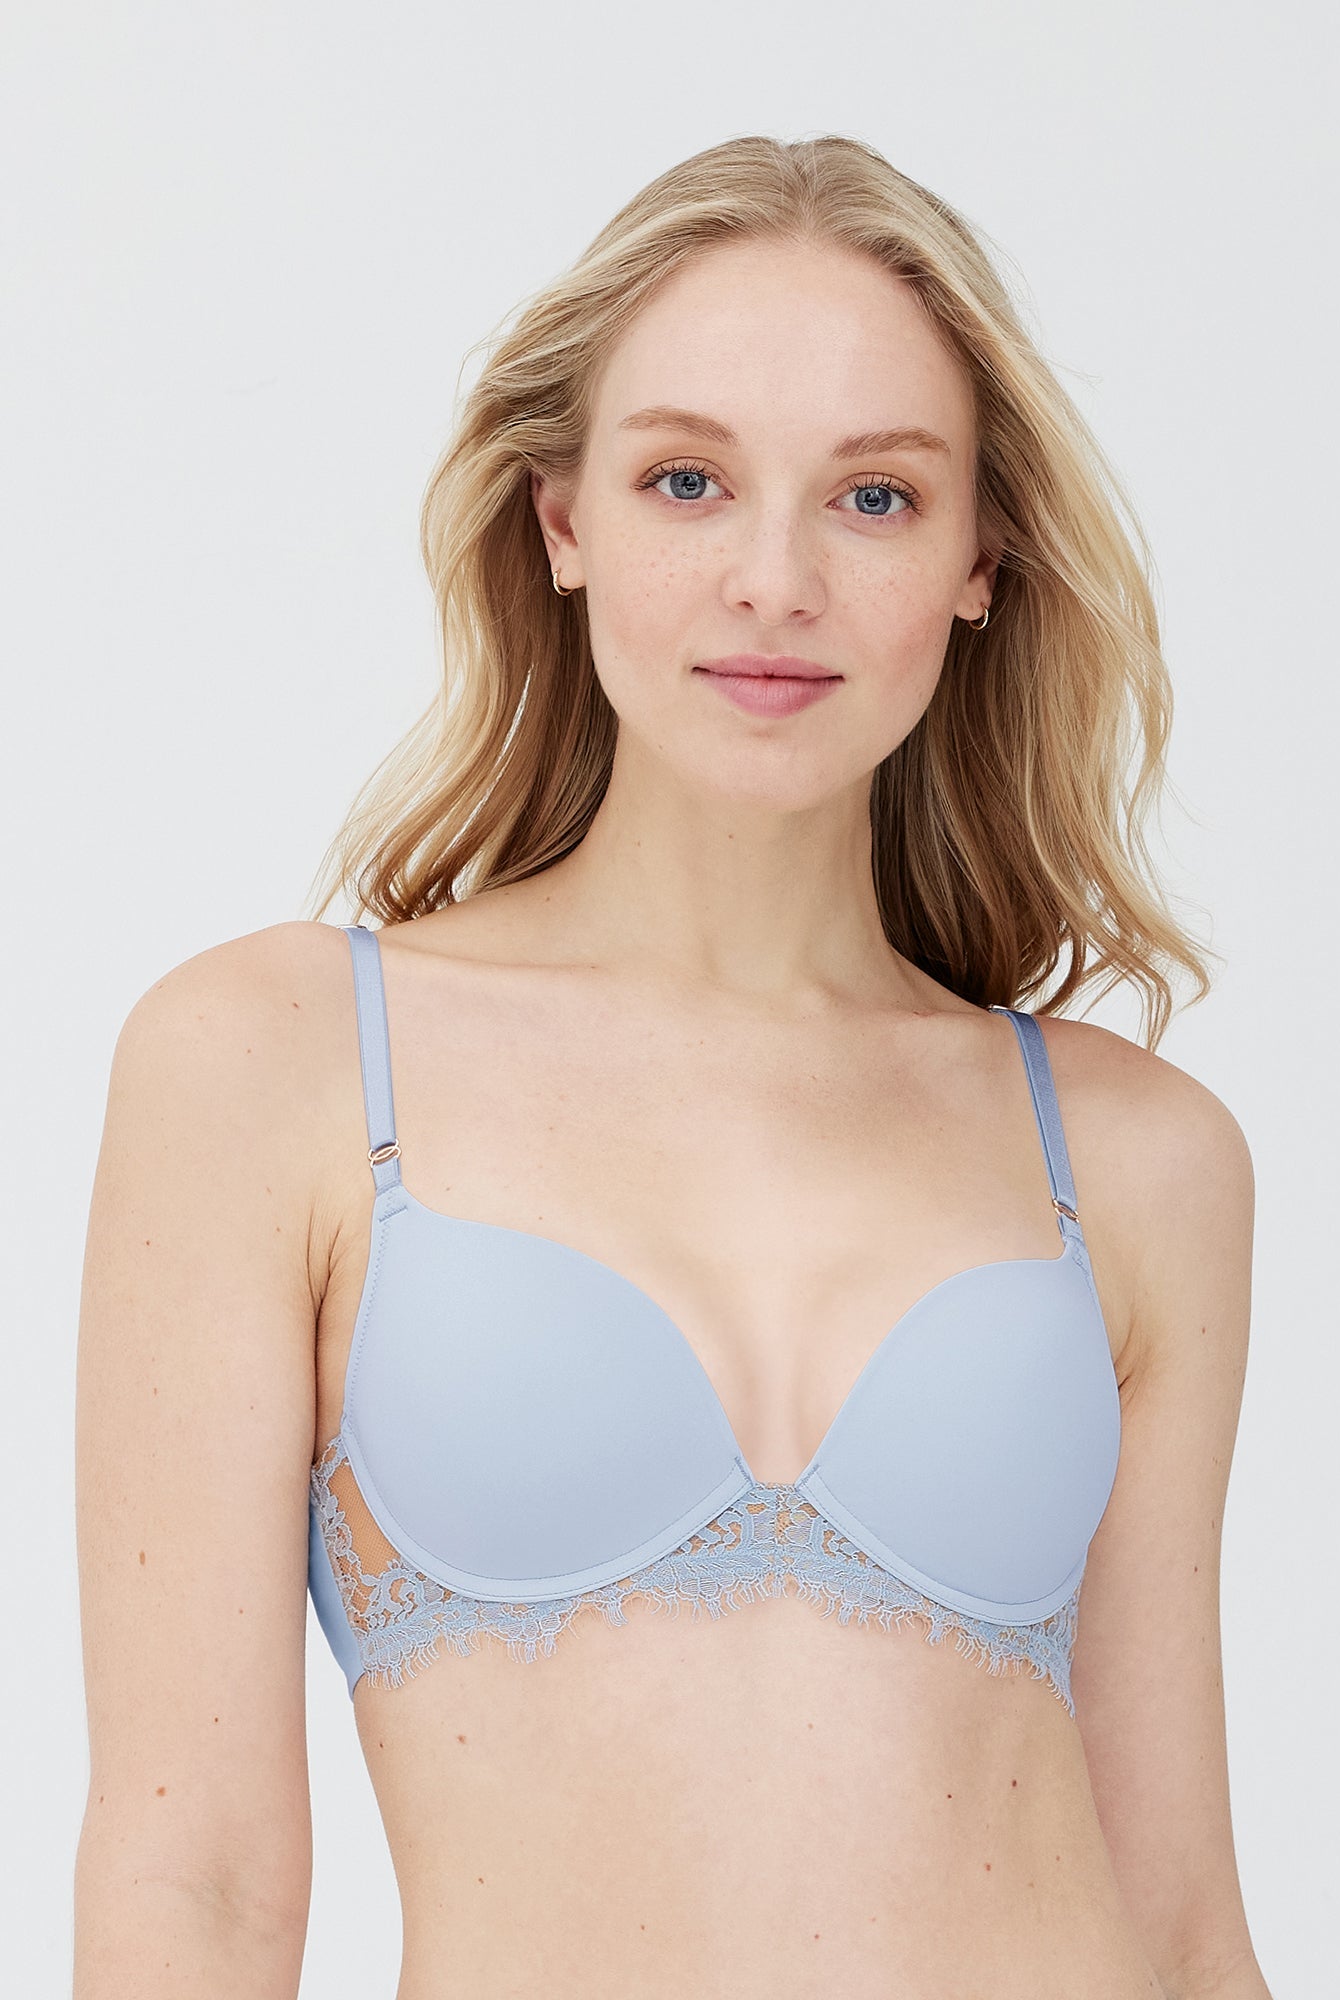 Buy online Blue Cotton Push Up Bra from lingerie for Women by